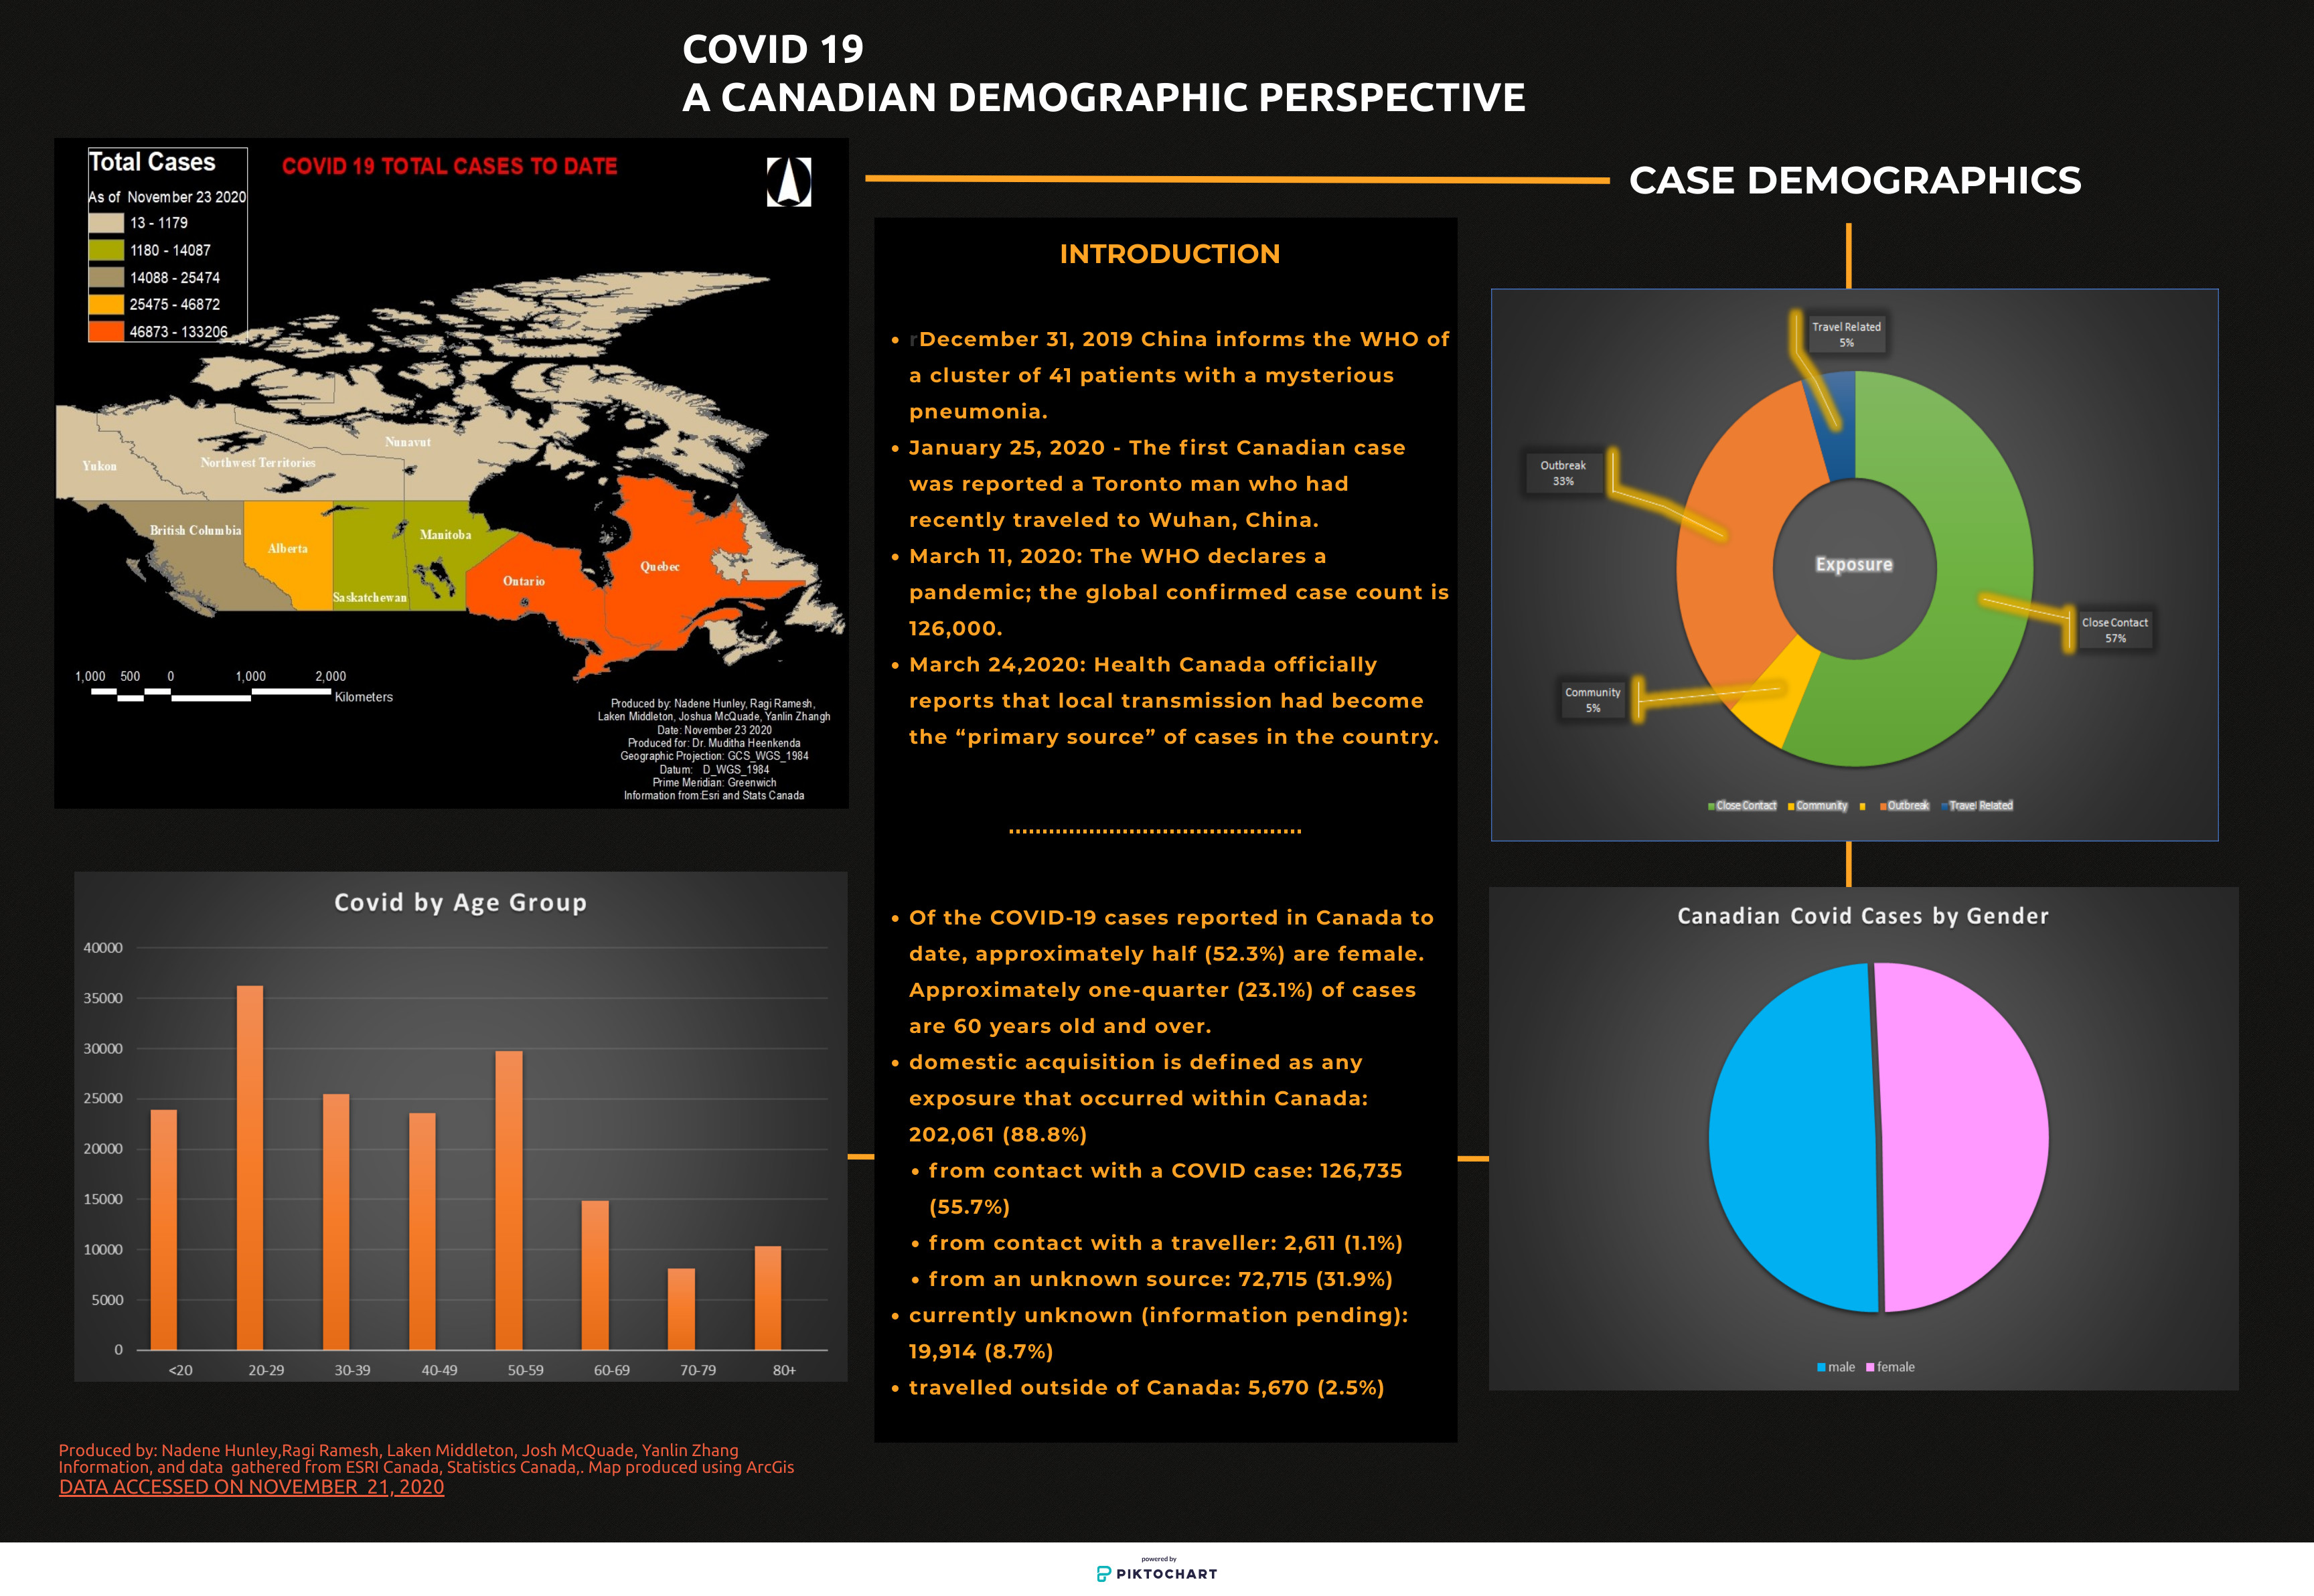 Infographic created by Hunley, Ramesh, Middleton, McQuade & Zhang for the Introduction to Geomatics course.